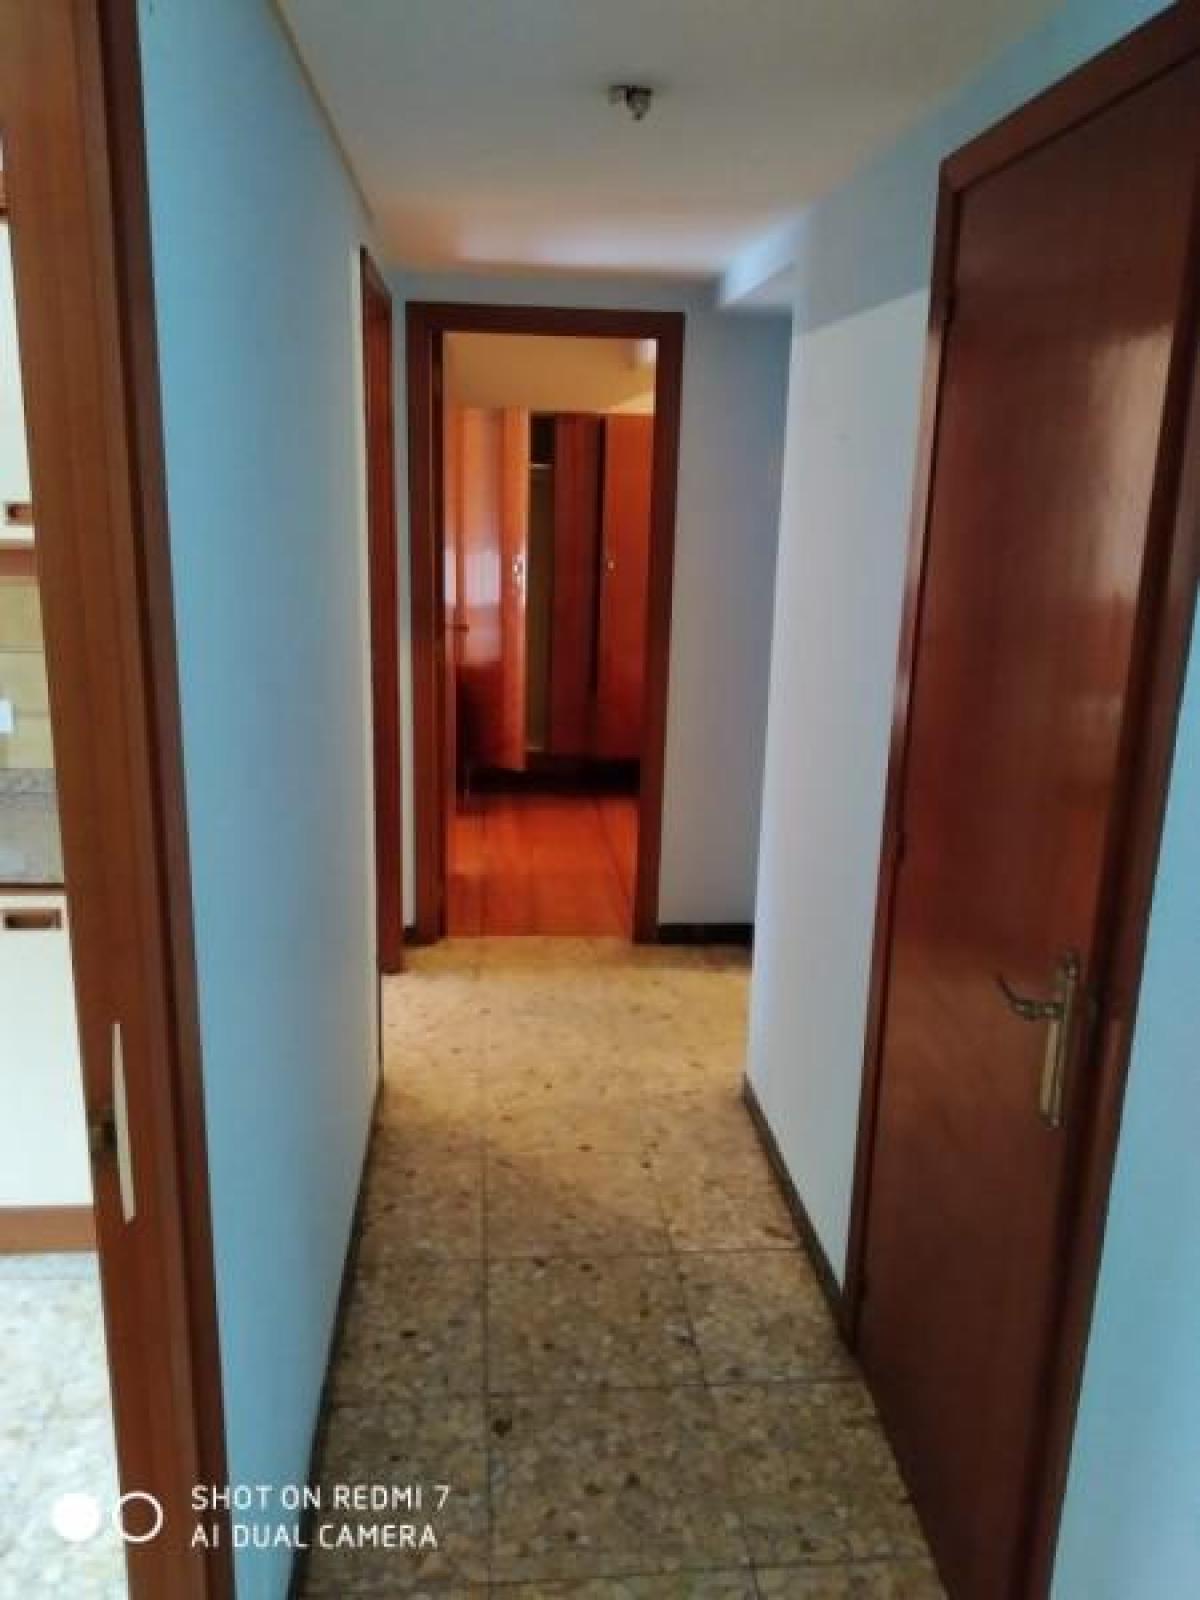 Picture of Apartment For Sale in Carballo, Asturias, Spain